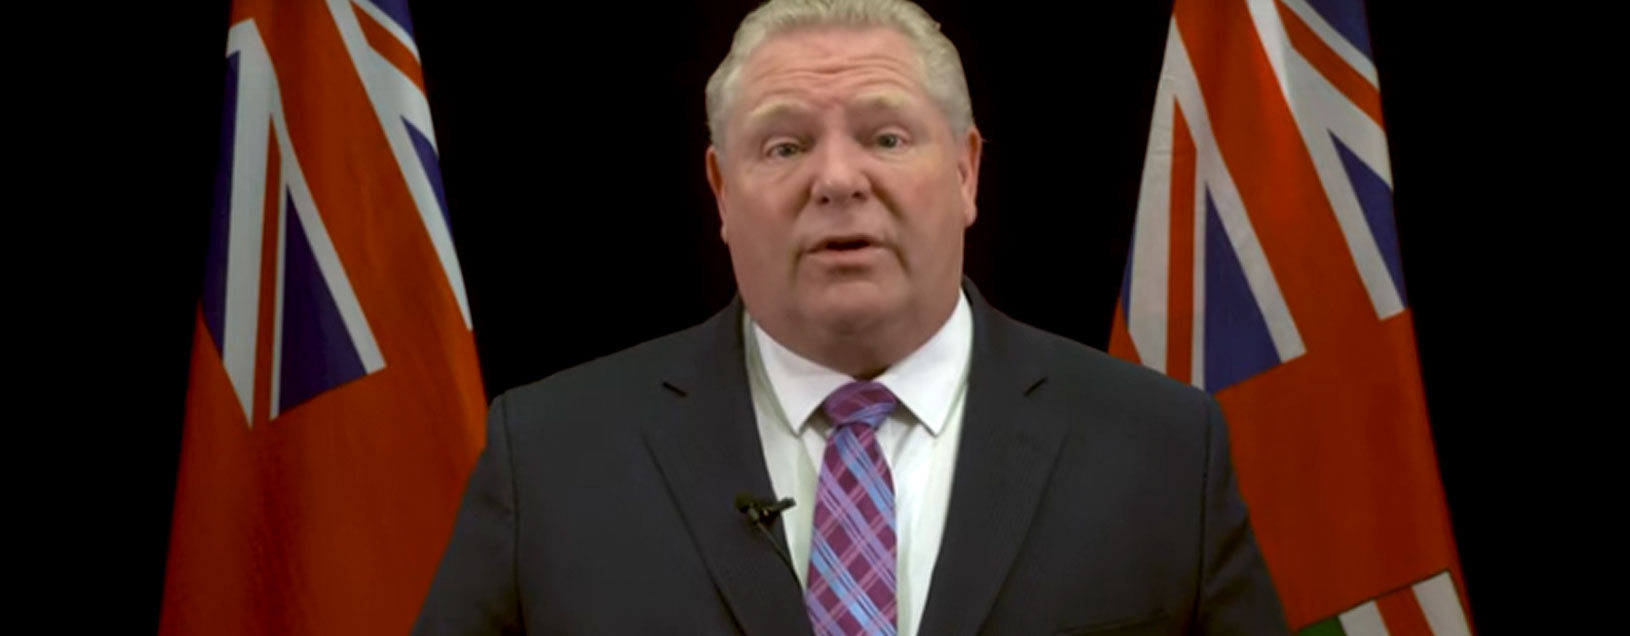 A special message to OPSWA and our members from Premier Ford